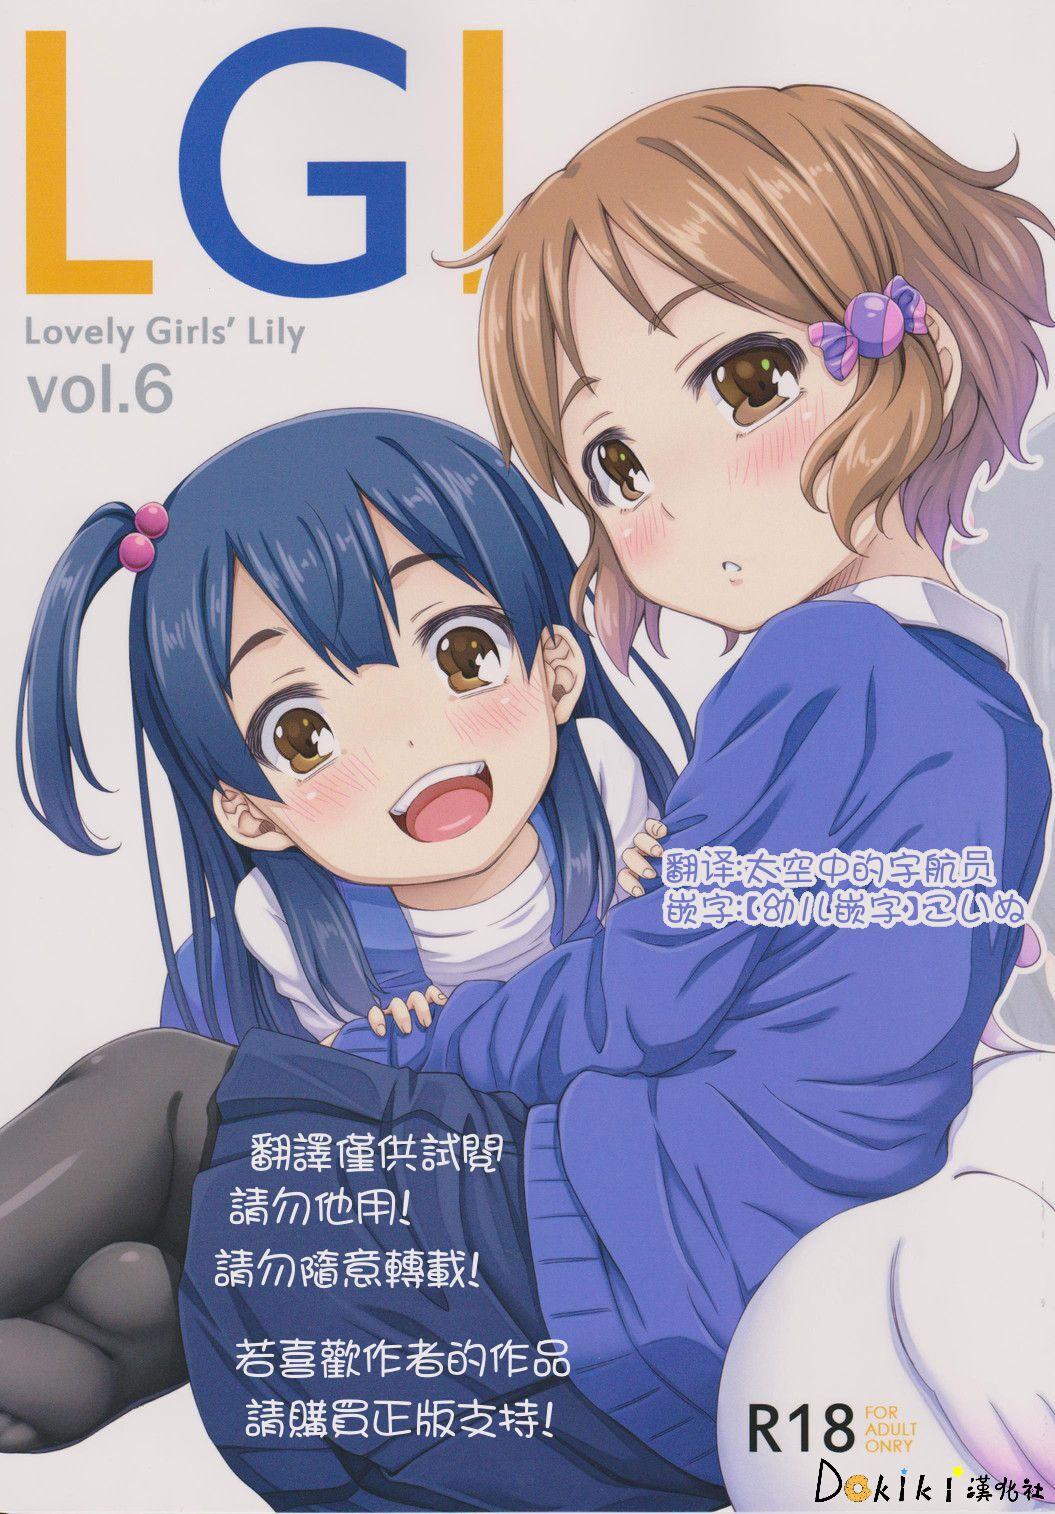 Asses Lovely Girls' Lily vol. 6 - Tamako market Relax - Page 1